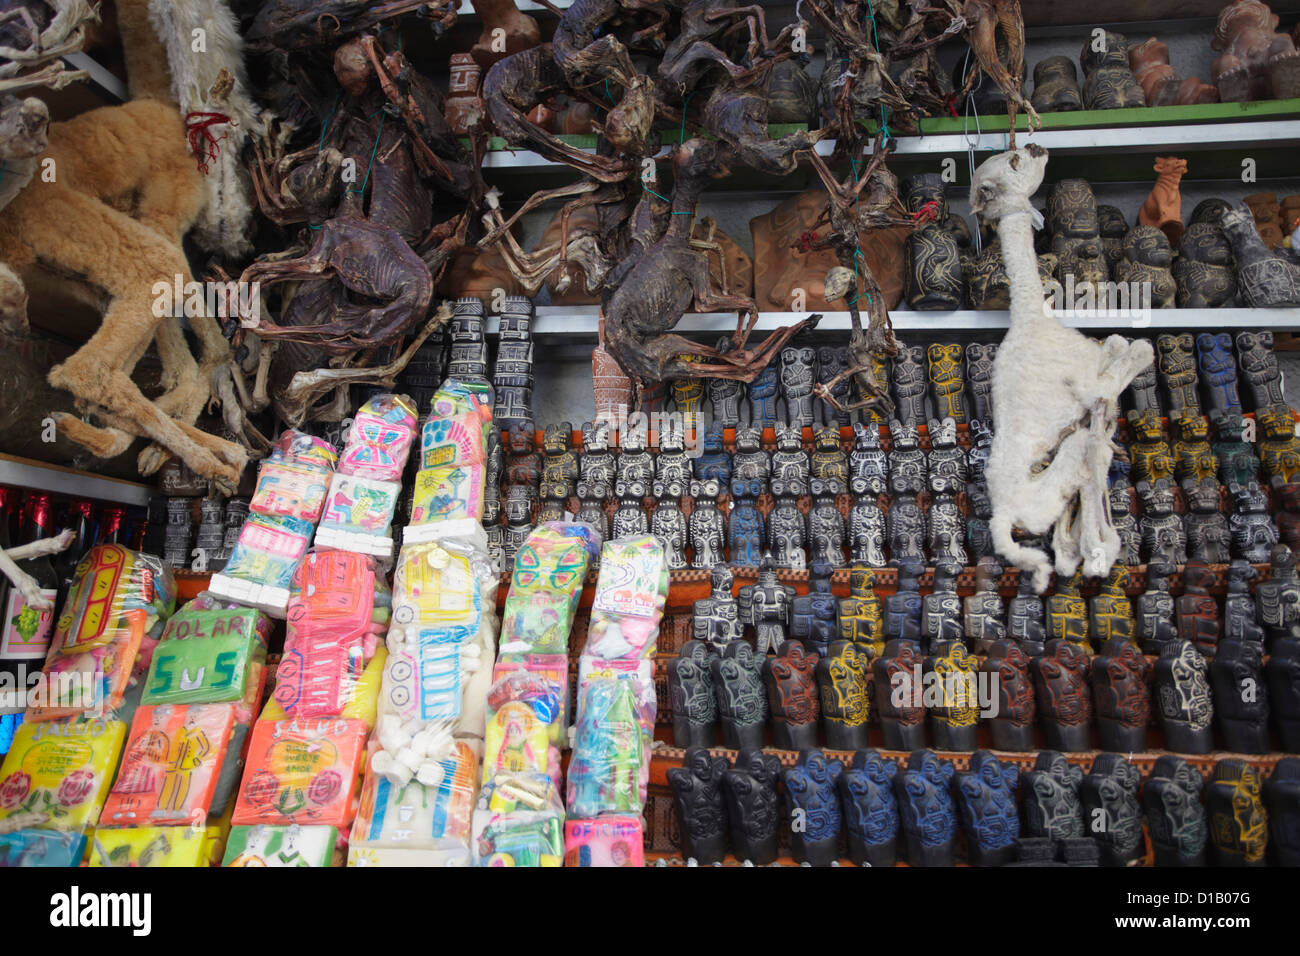 Colourful confectionery, dried llama foetuses and souvenirs in Witches' Market, La Paz, Bolivia Stock Photo